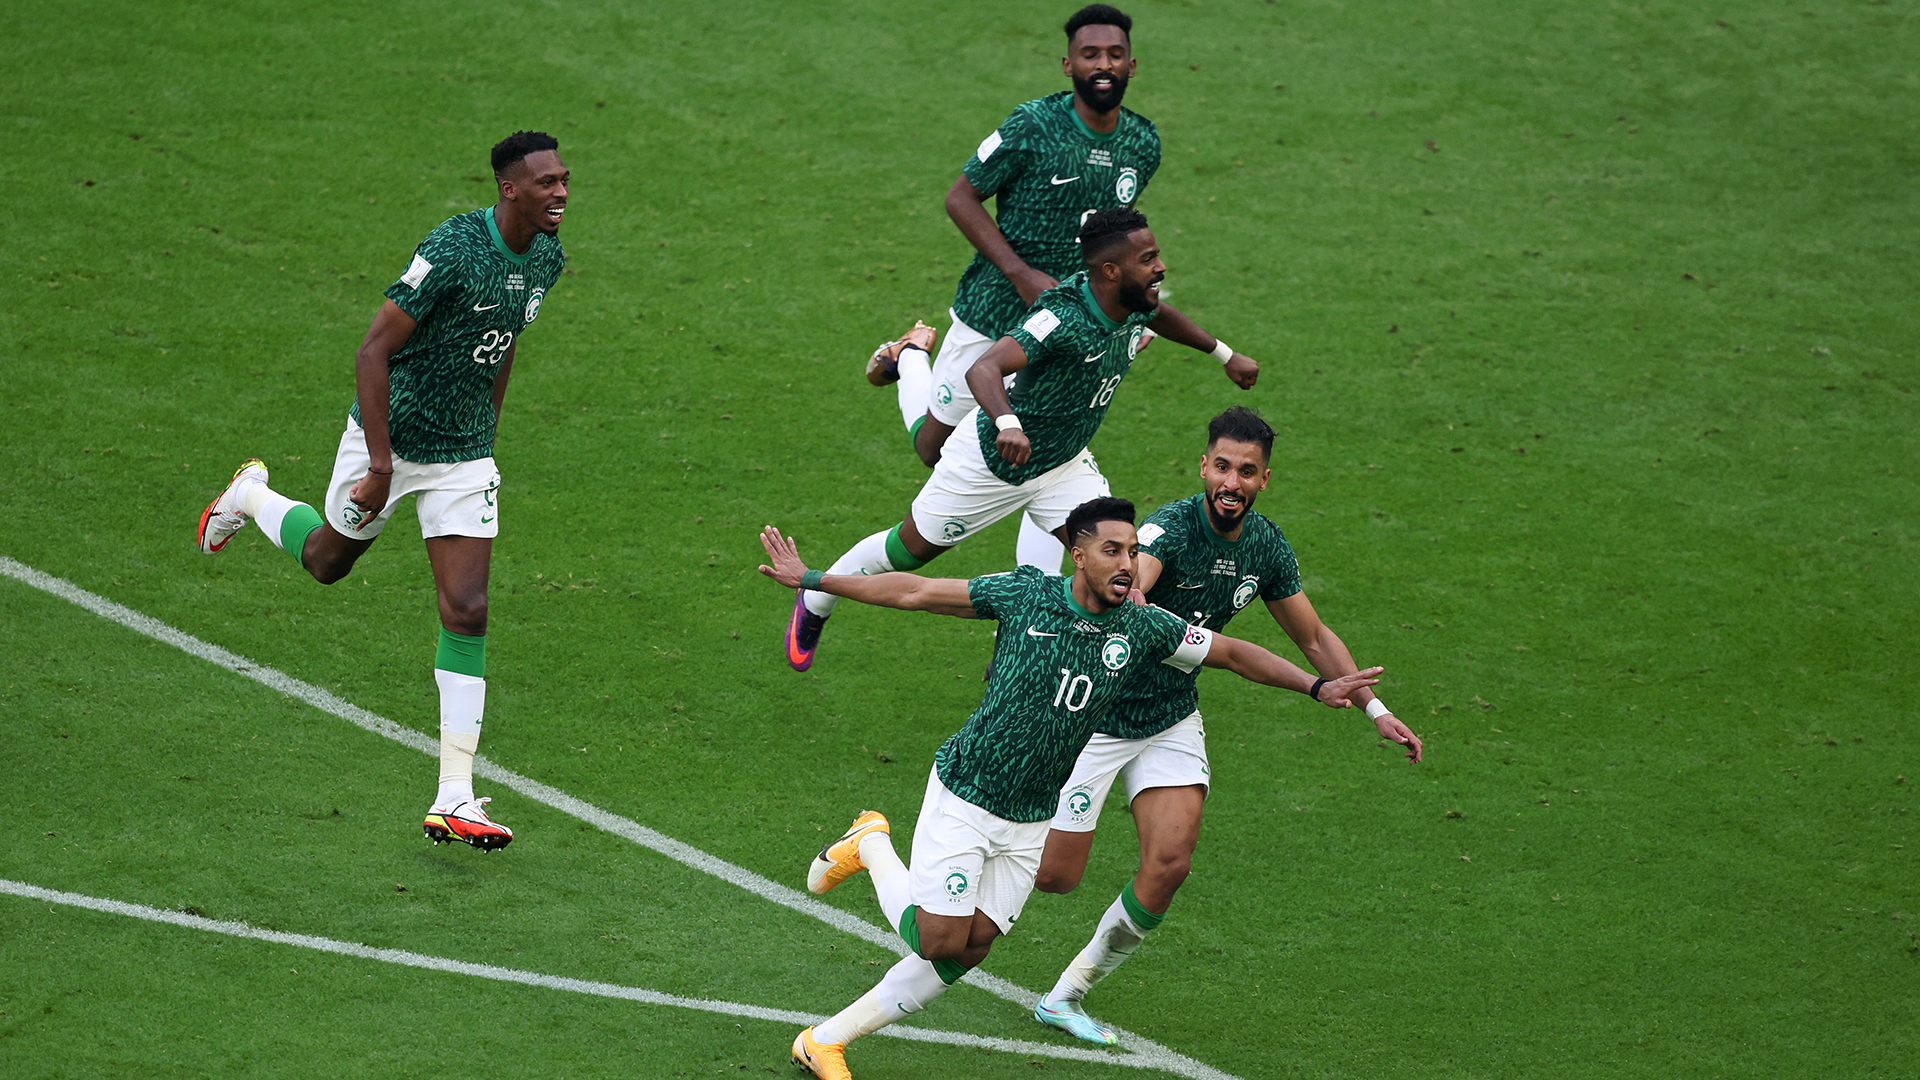 Salem Aldawsari of Saudi Arabia celebrates as he scores the goal during the FIFA World Cup Qatar 2022 Group C match between Argentina and Saudi Arabia at Lusail Stadium on November 22, 2022 in Lusail City, Qatar.